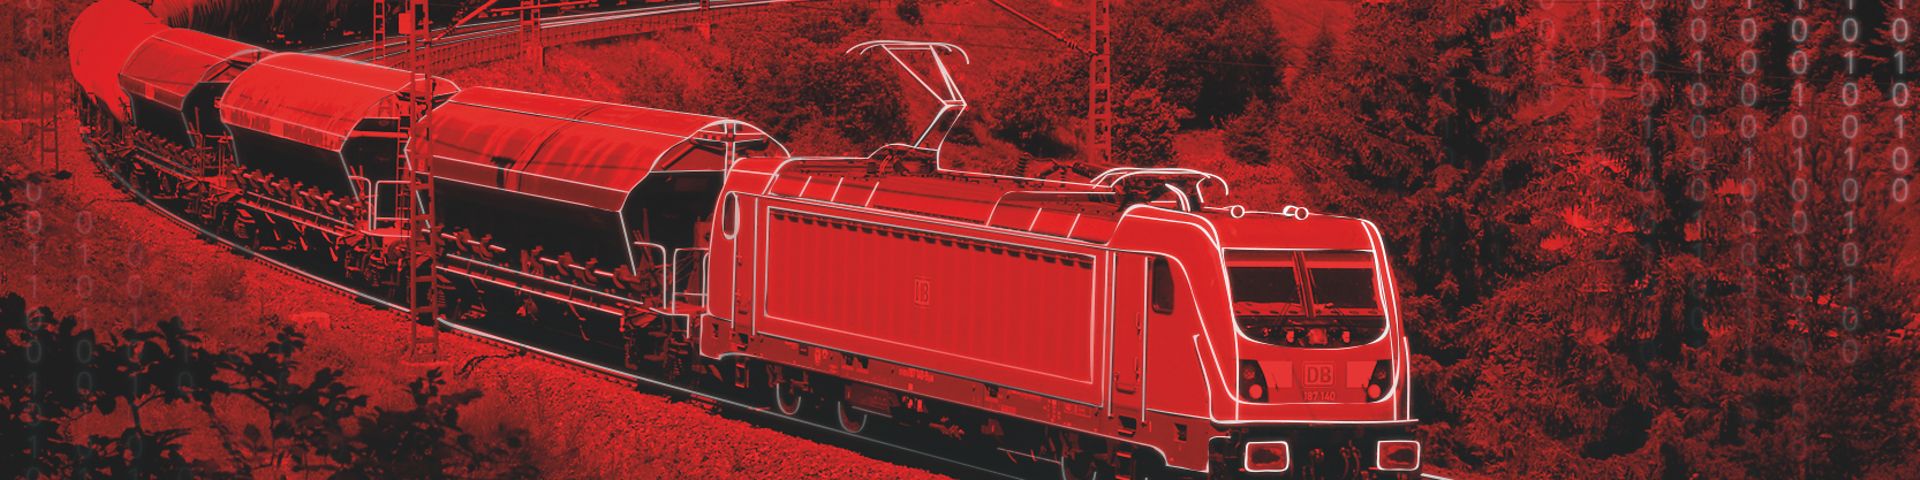 Red cooured picture of a freight train.